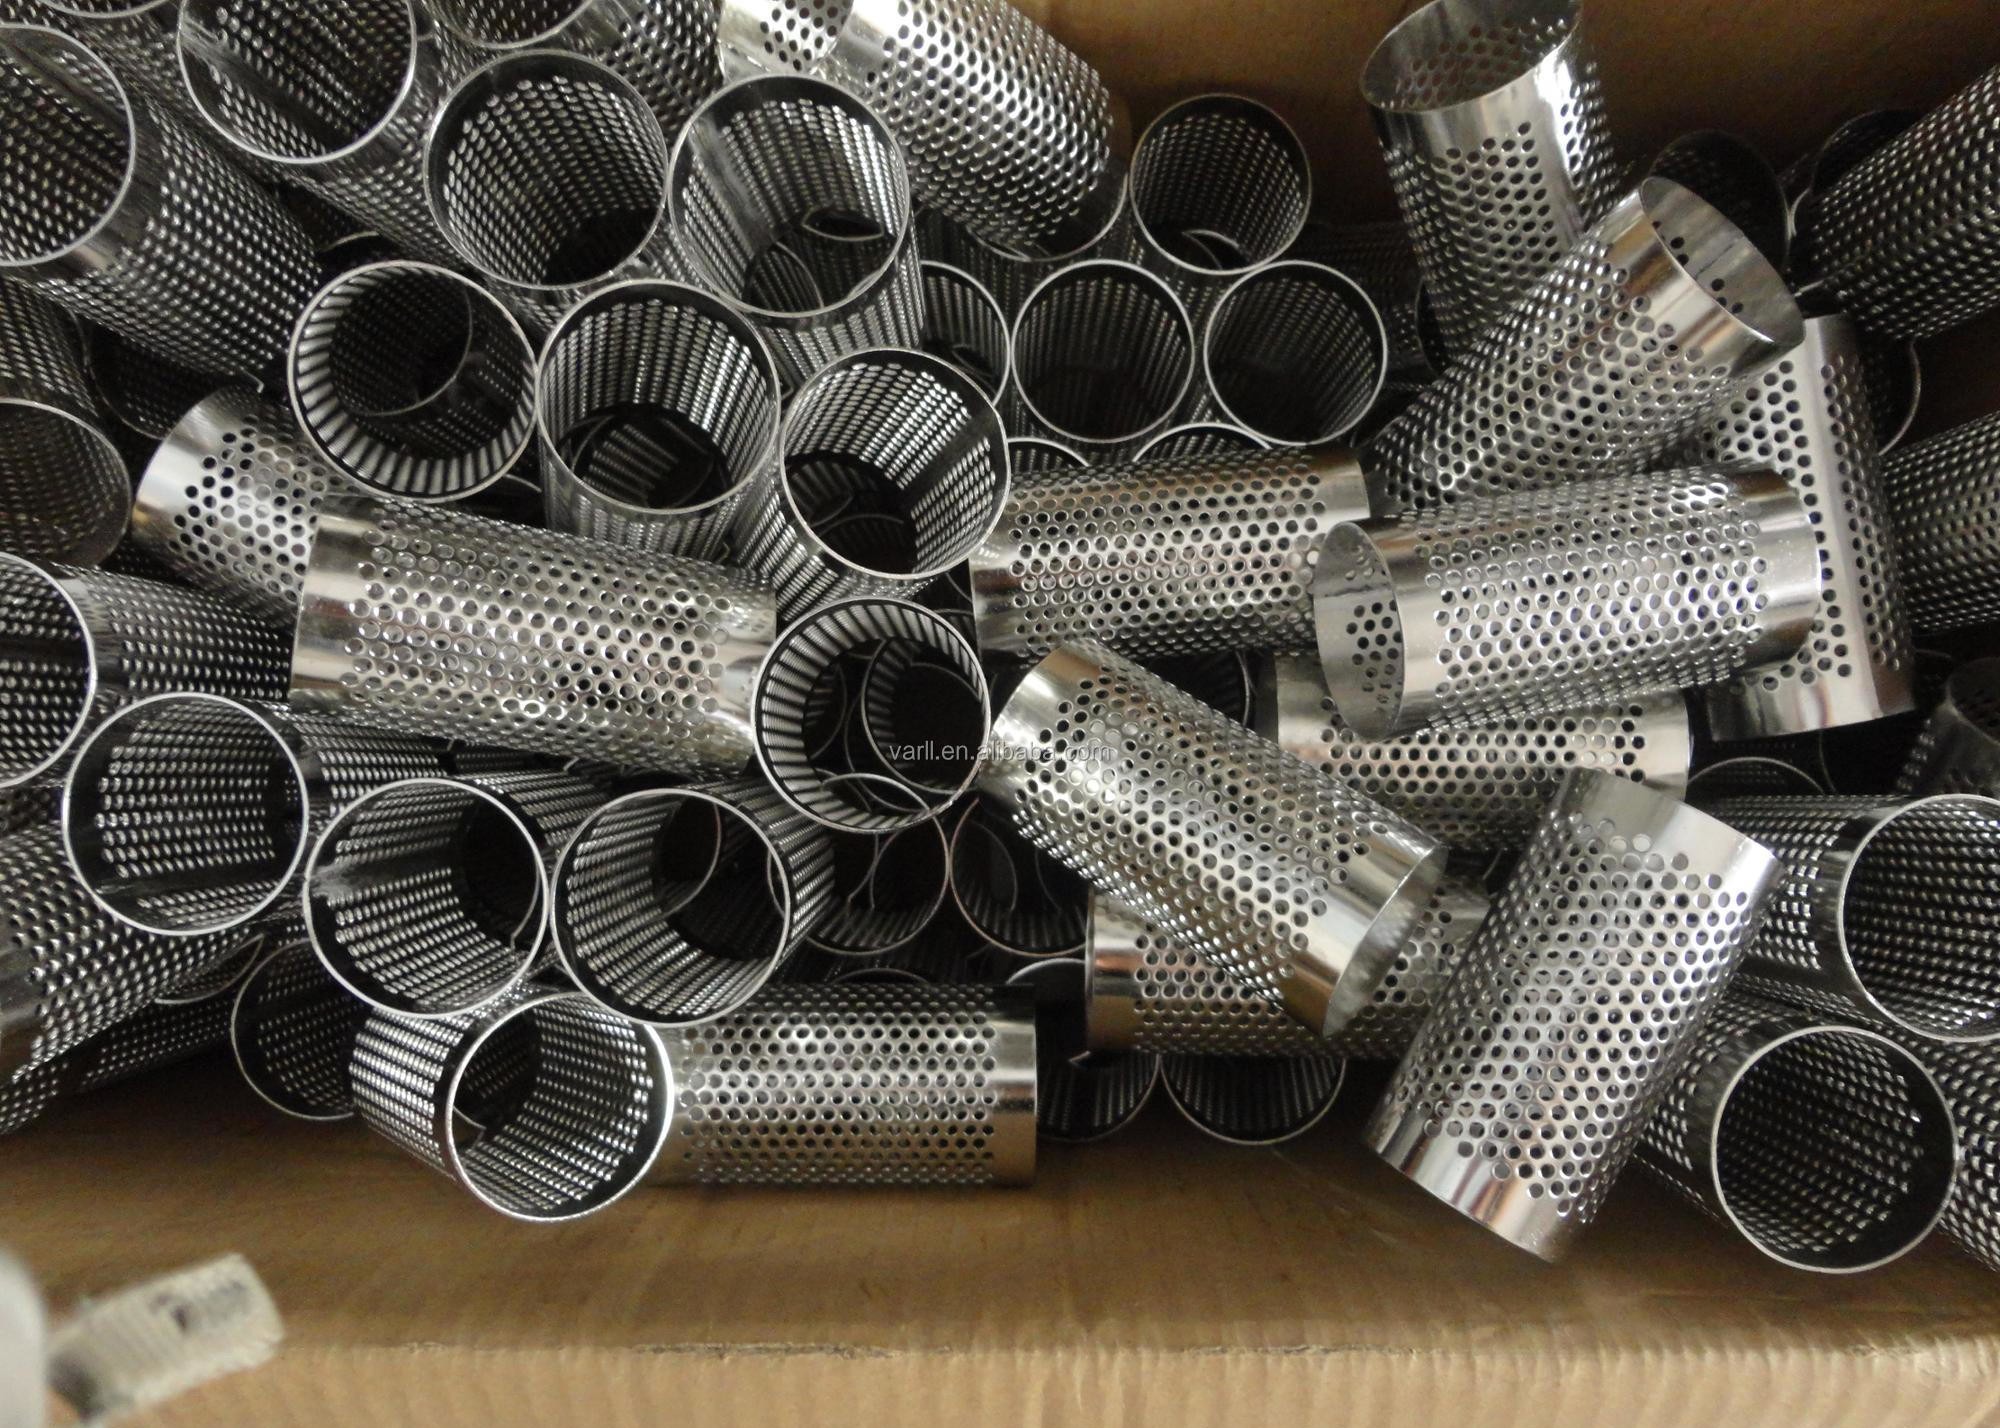 Quality All Round Hole Perforated Stainless Steel Pipe Cylindrical Filter In Water System wholesale